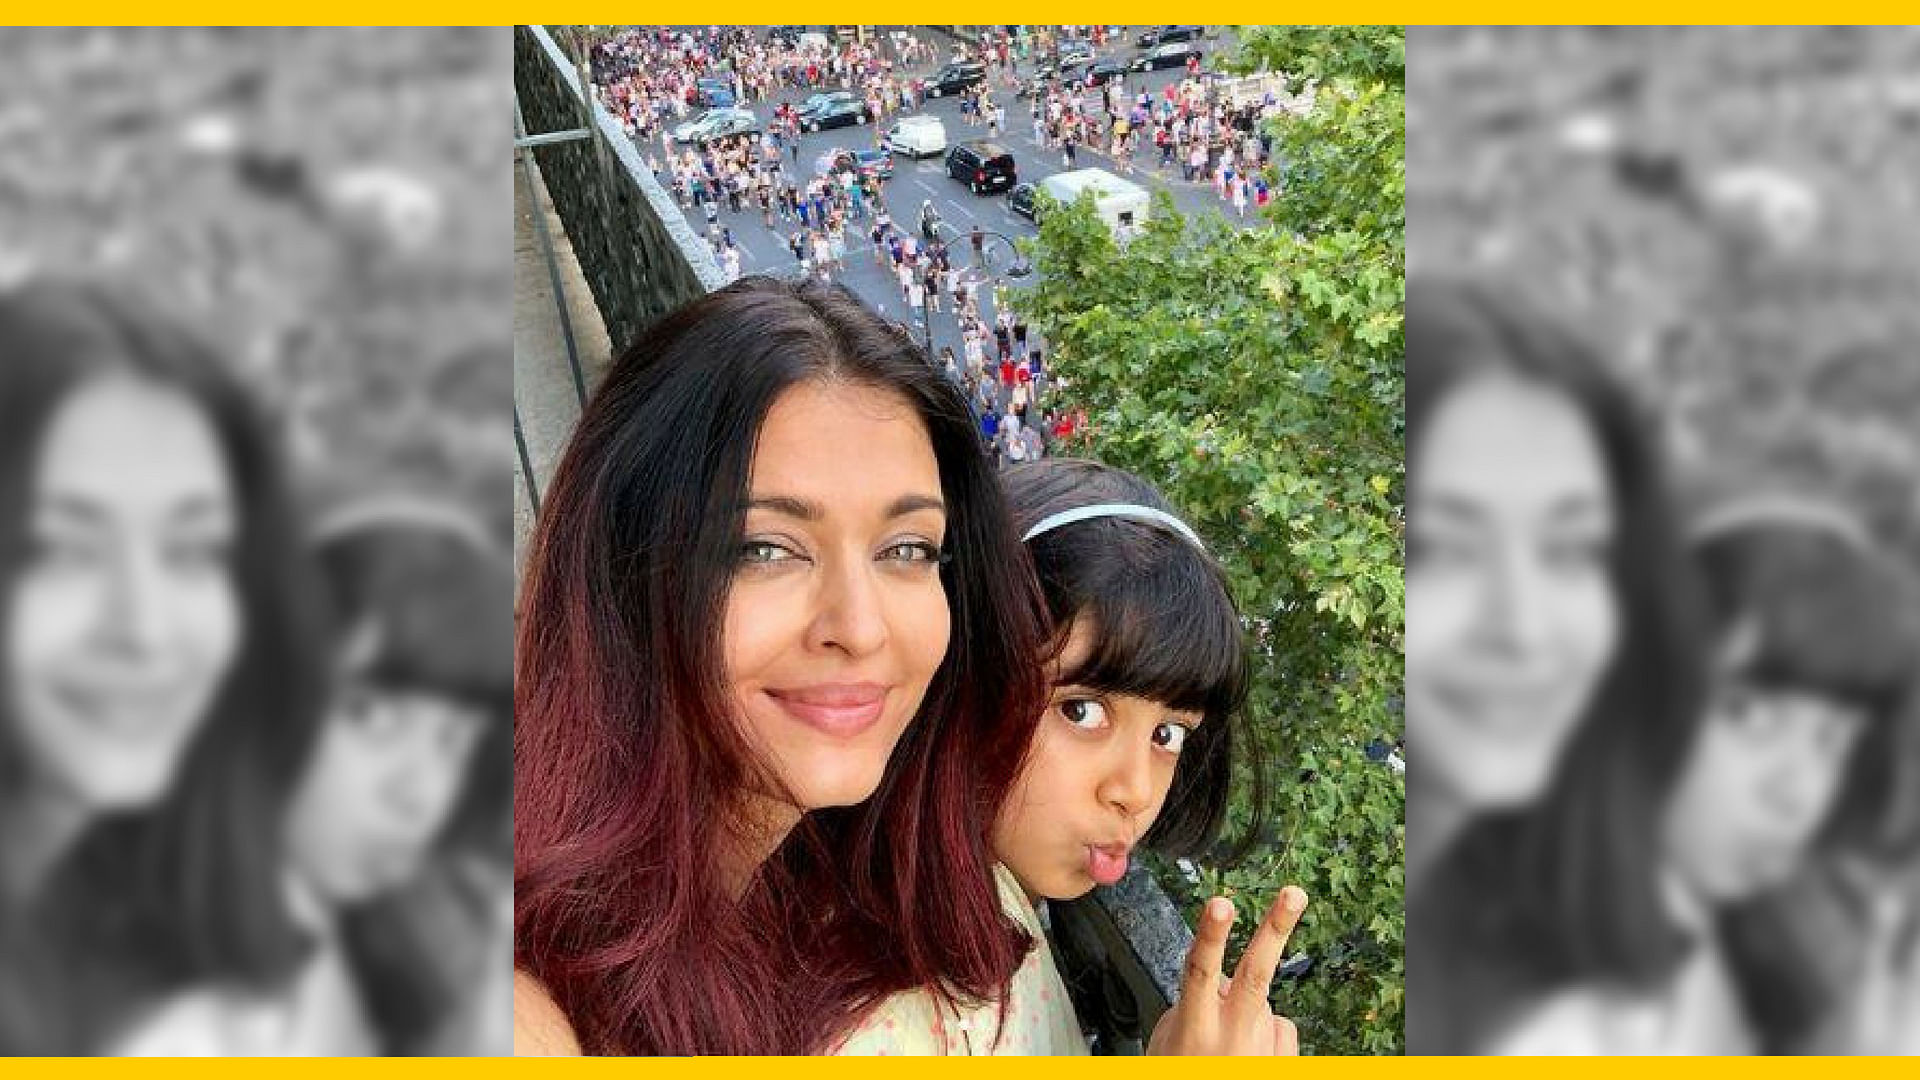 Aishwarya Rai Bachchan posts a selfie in Paris with daughter Aaradhya after France’s big win.